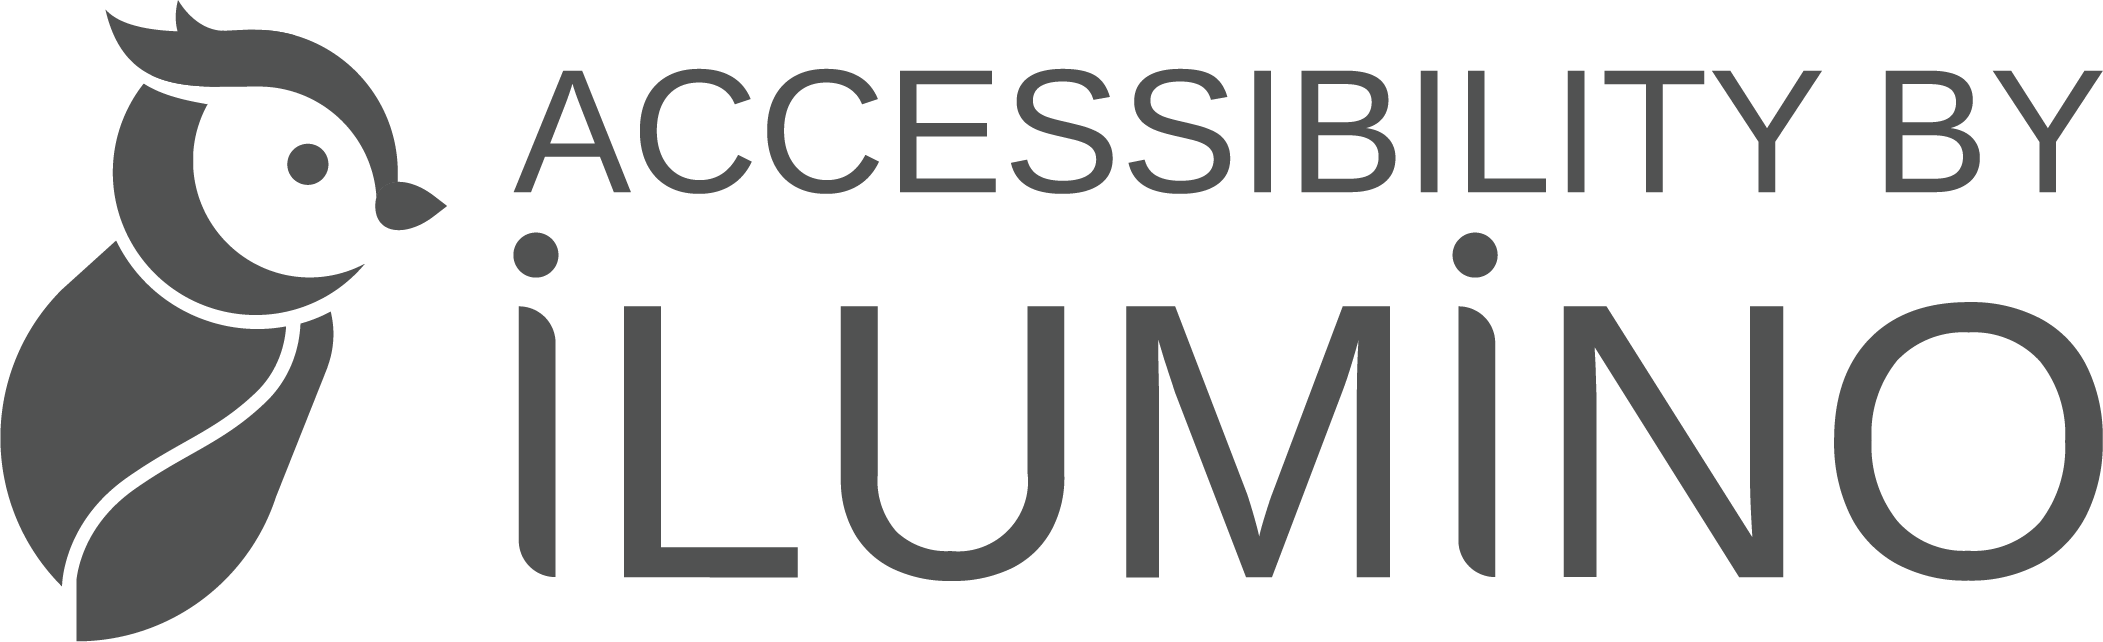 Accessibility by Ilumino.co